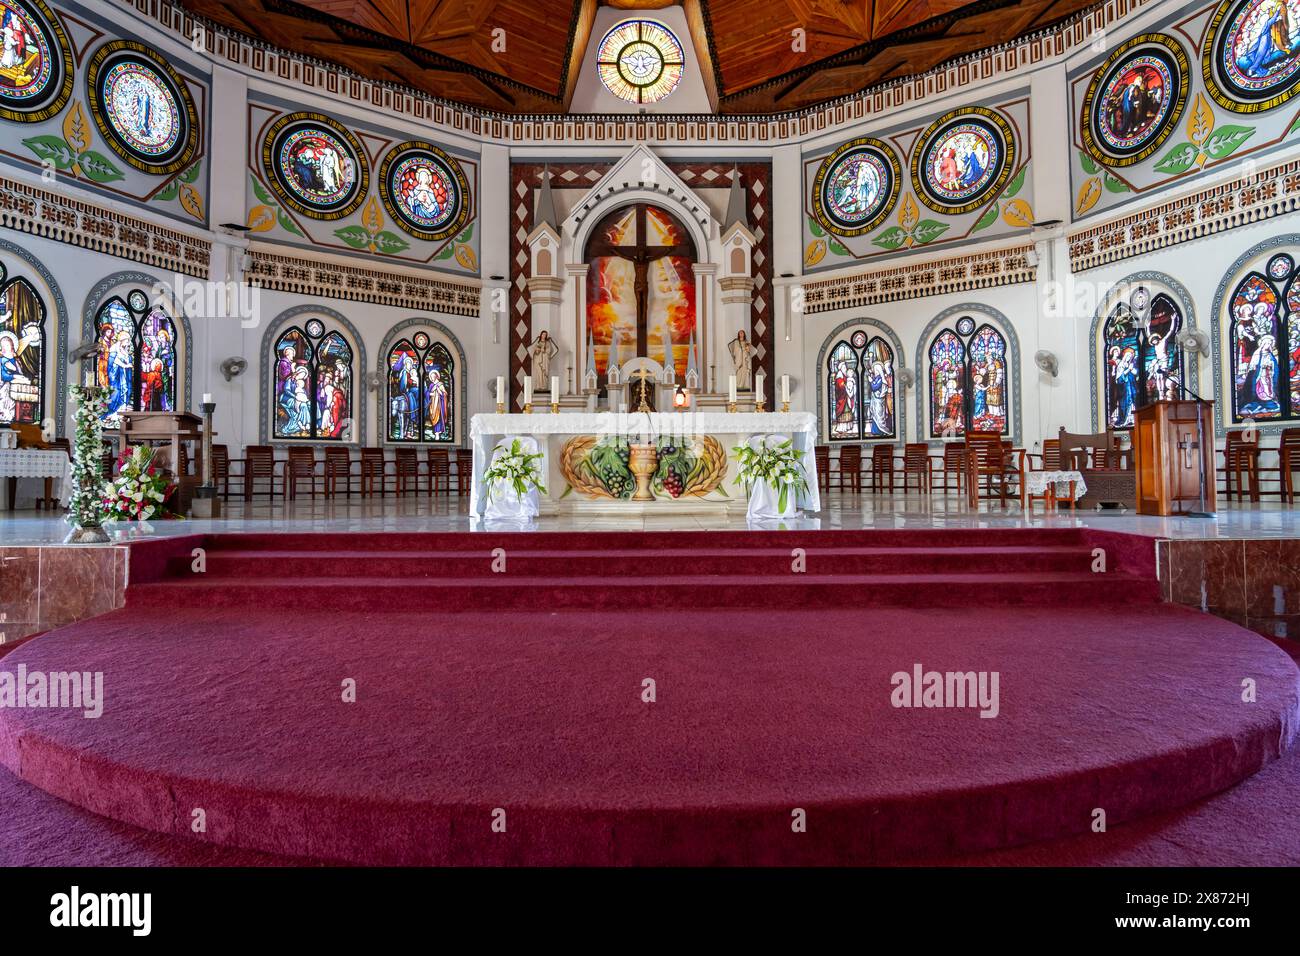 The Immaculate Conception Cathedral interior at Apia Samoa, South Pacific. Stock Photo